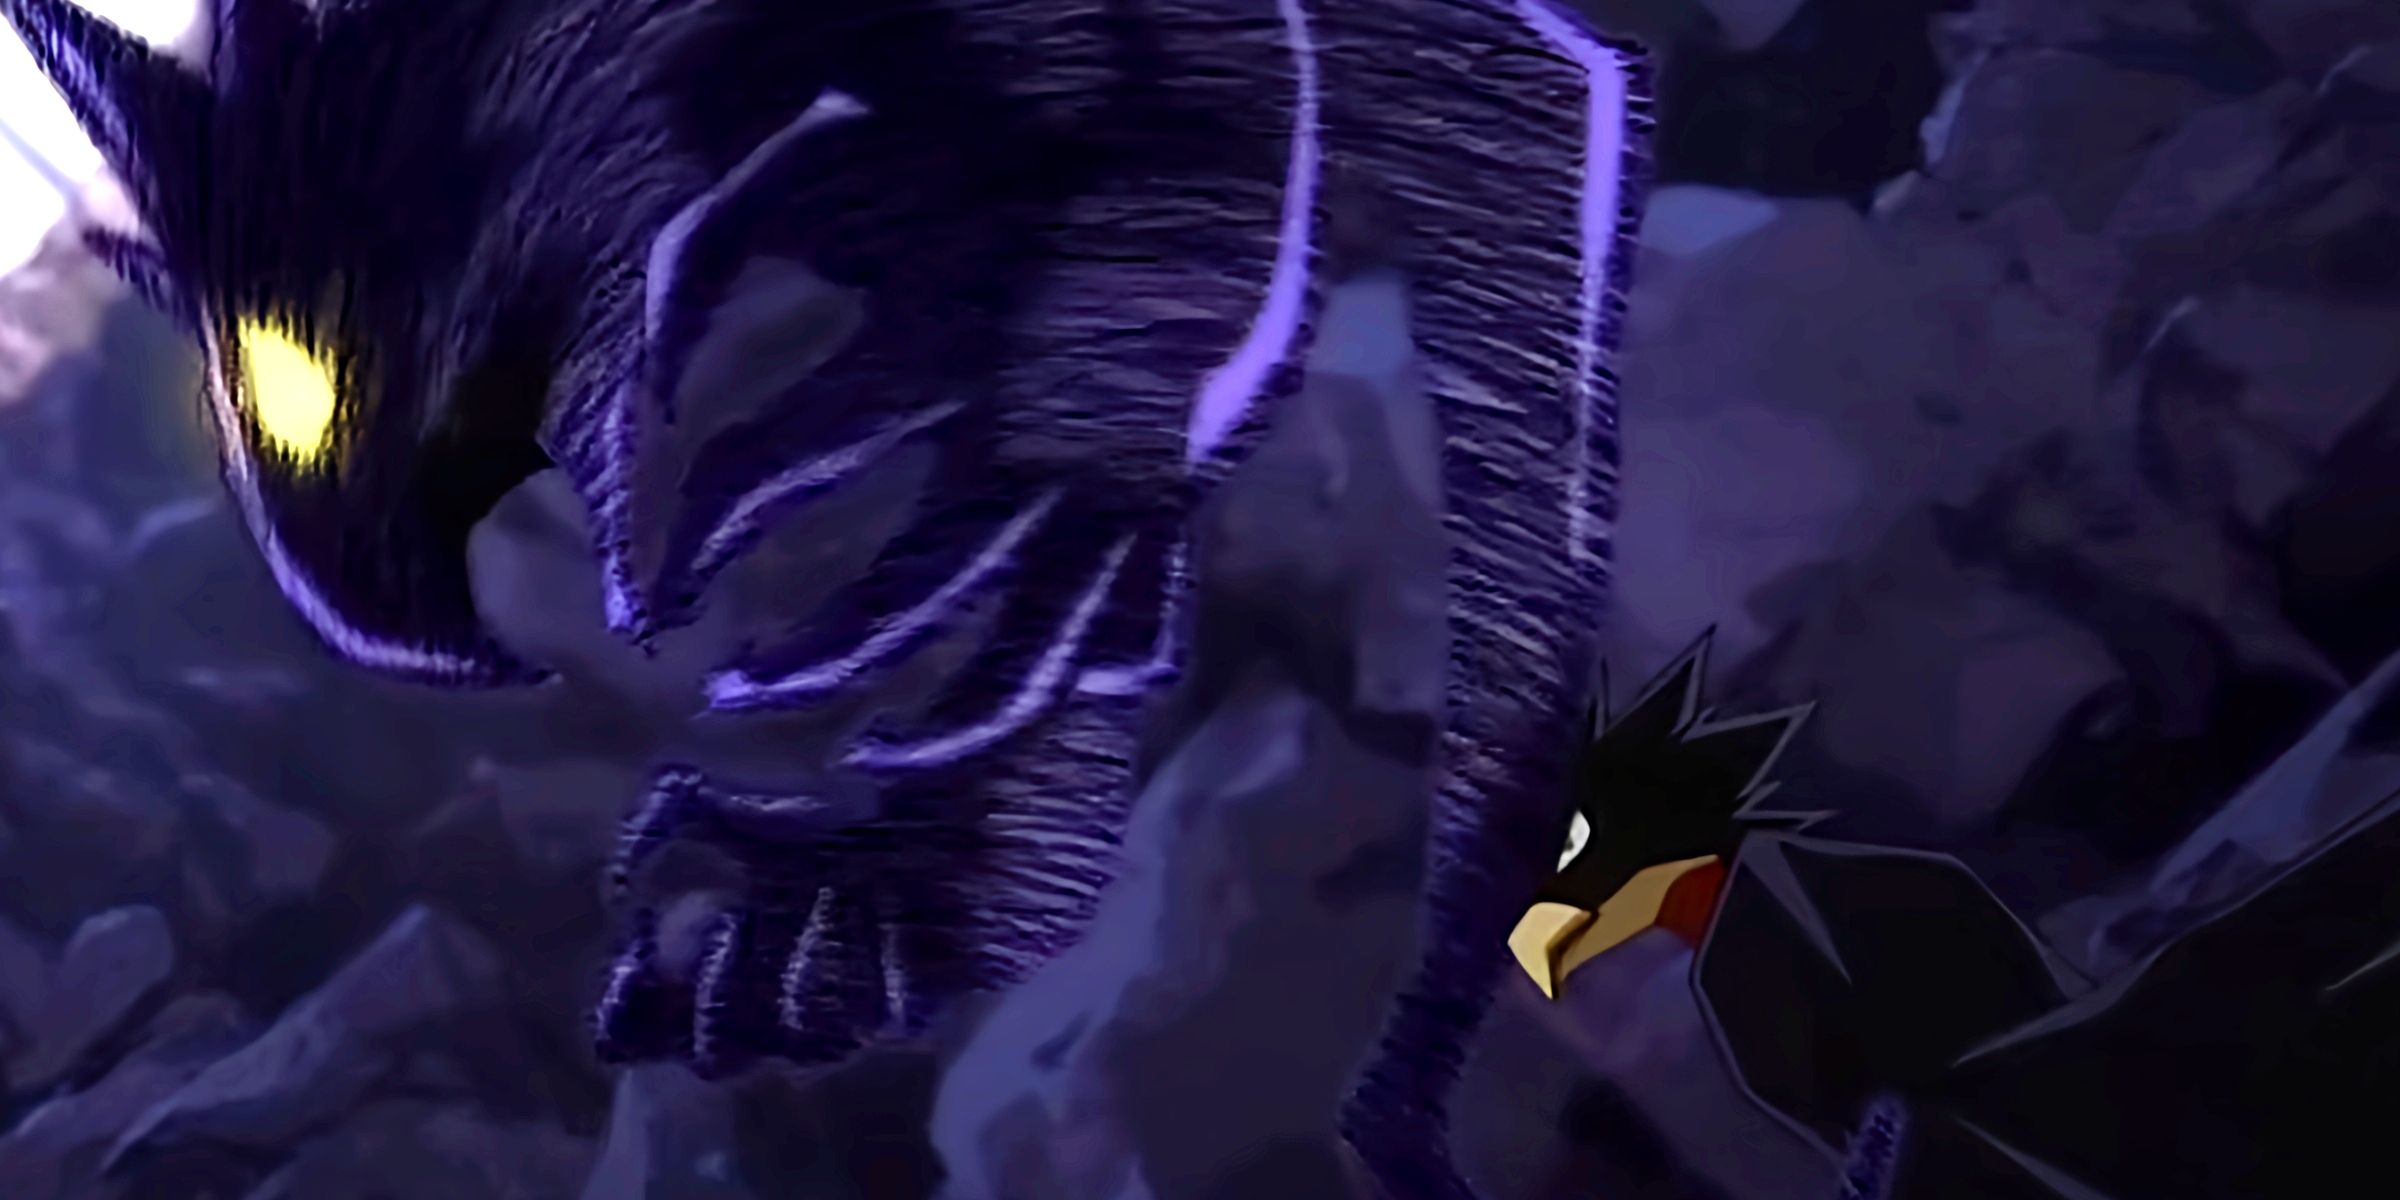 Fumikage using a monstrous version of Dark Shadow in My hero Academia